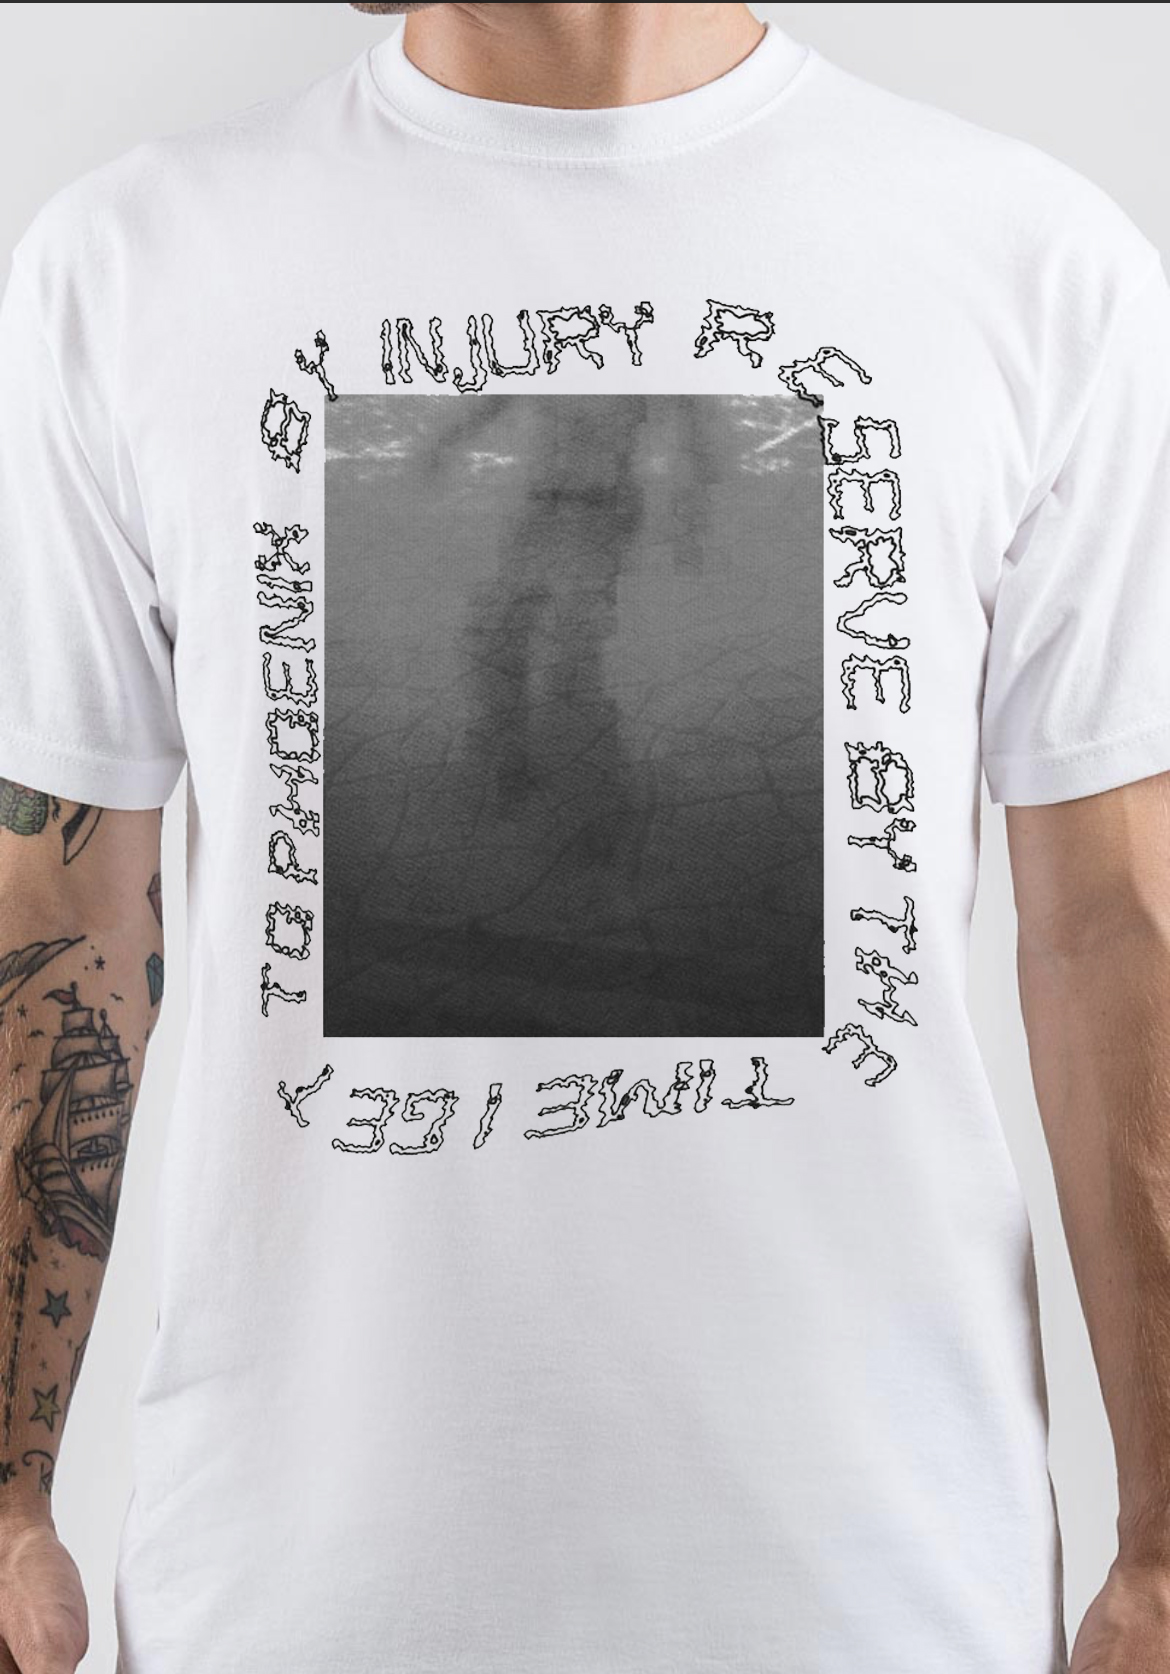 Injury Reserve T-Shirt And Merchandise